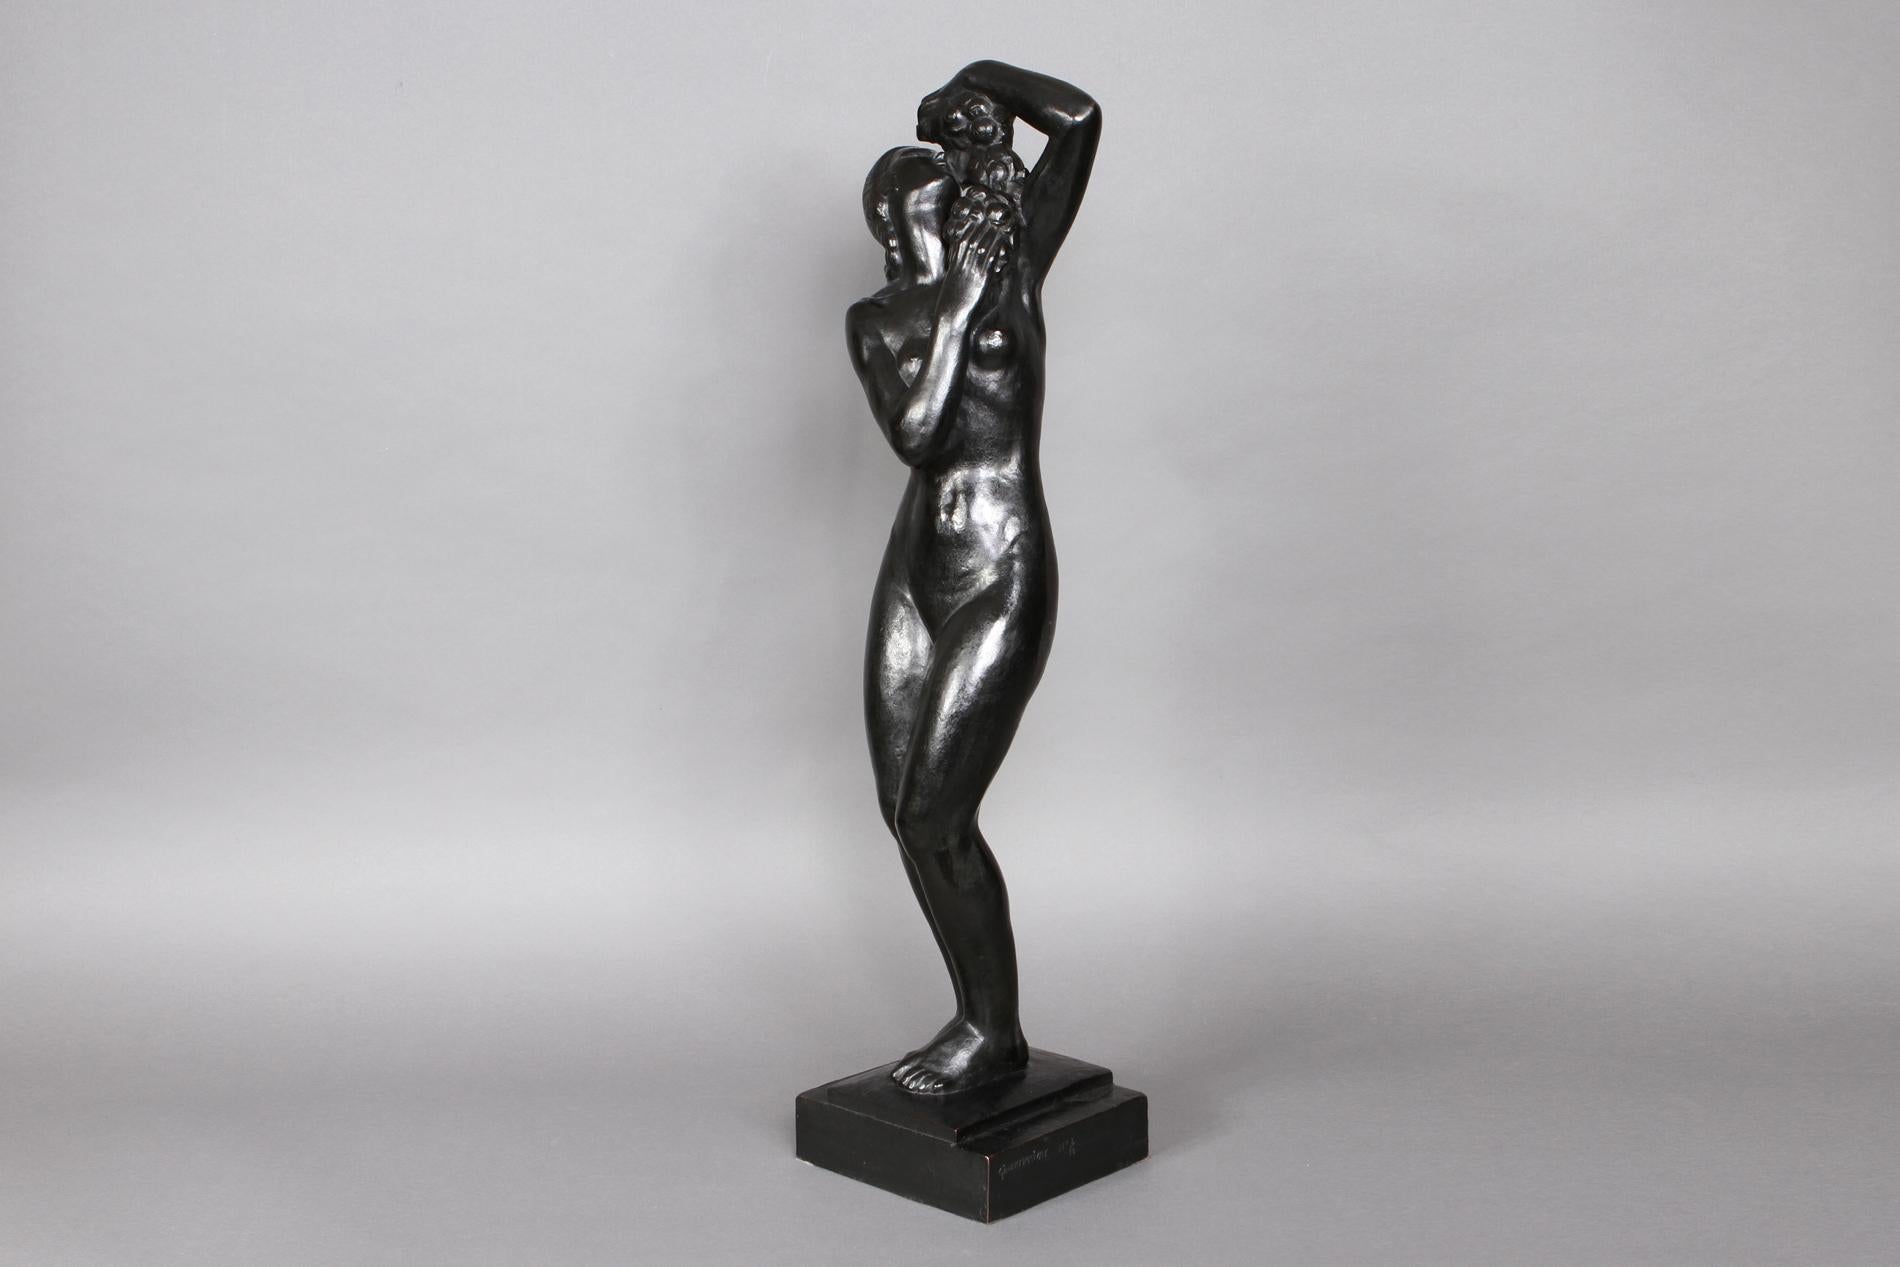 Sculpture in bronze black patina by Gilbert Privat. The sculpture is engraved Alexis RUDIER founder and was realized in a number of 12 copies and this one is numbered 3/12

The Model is 